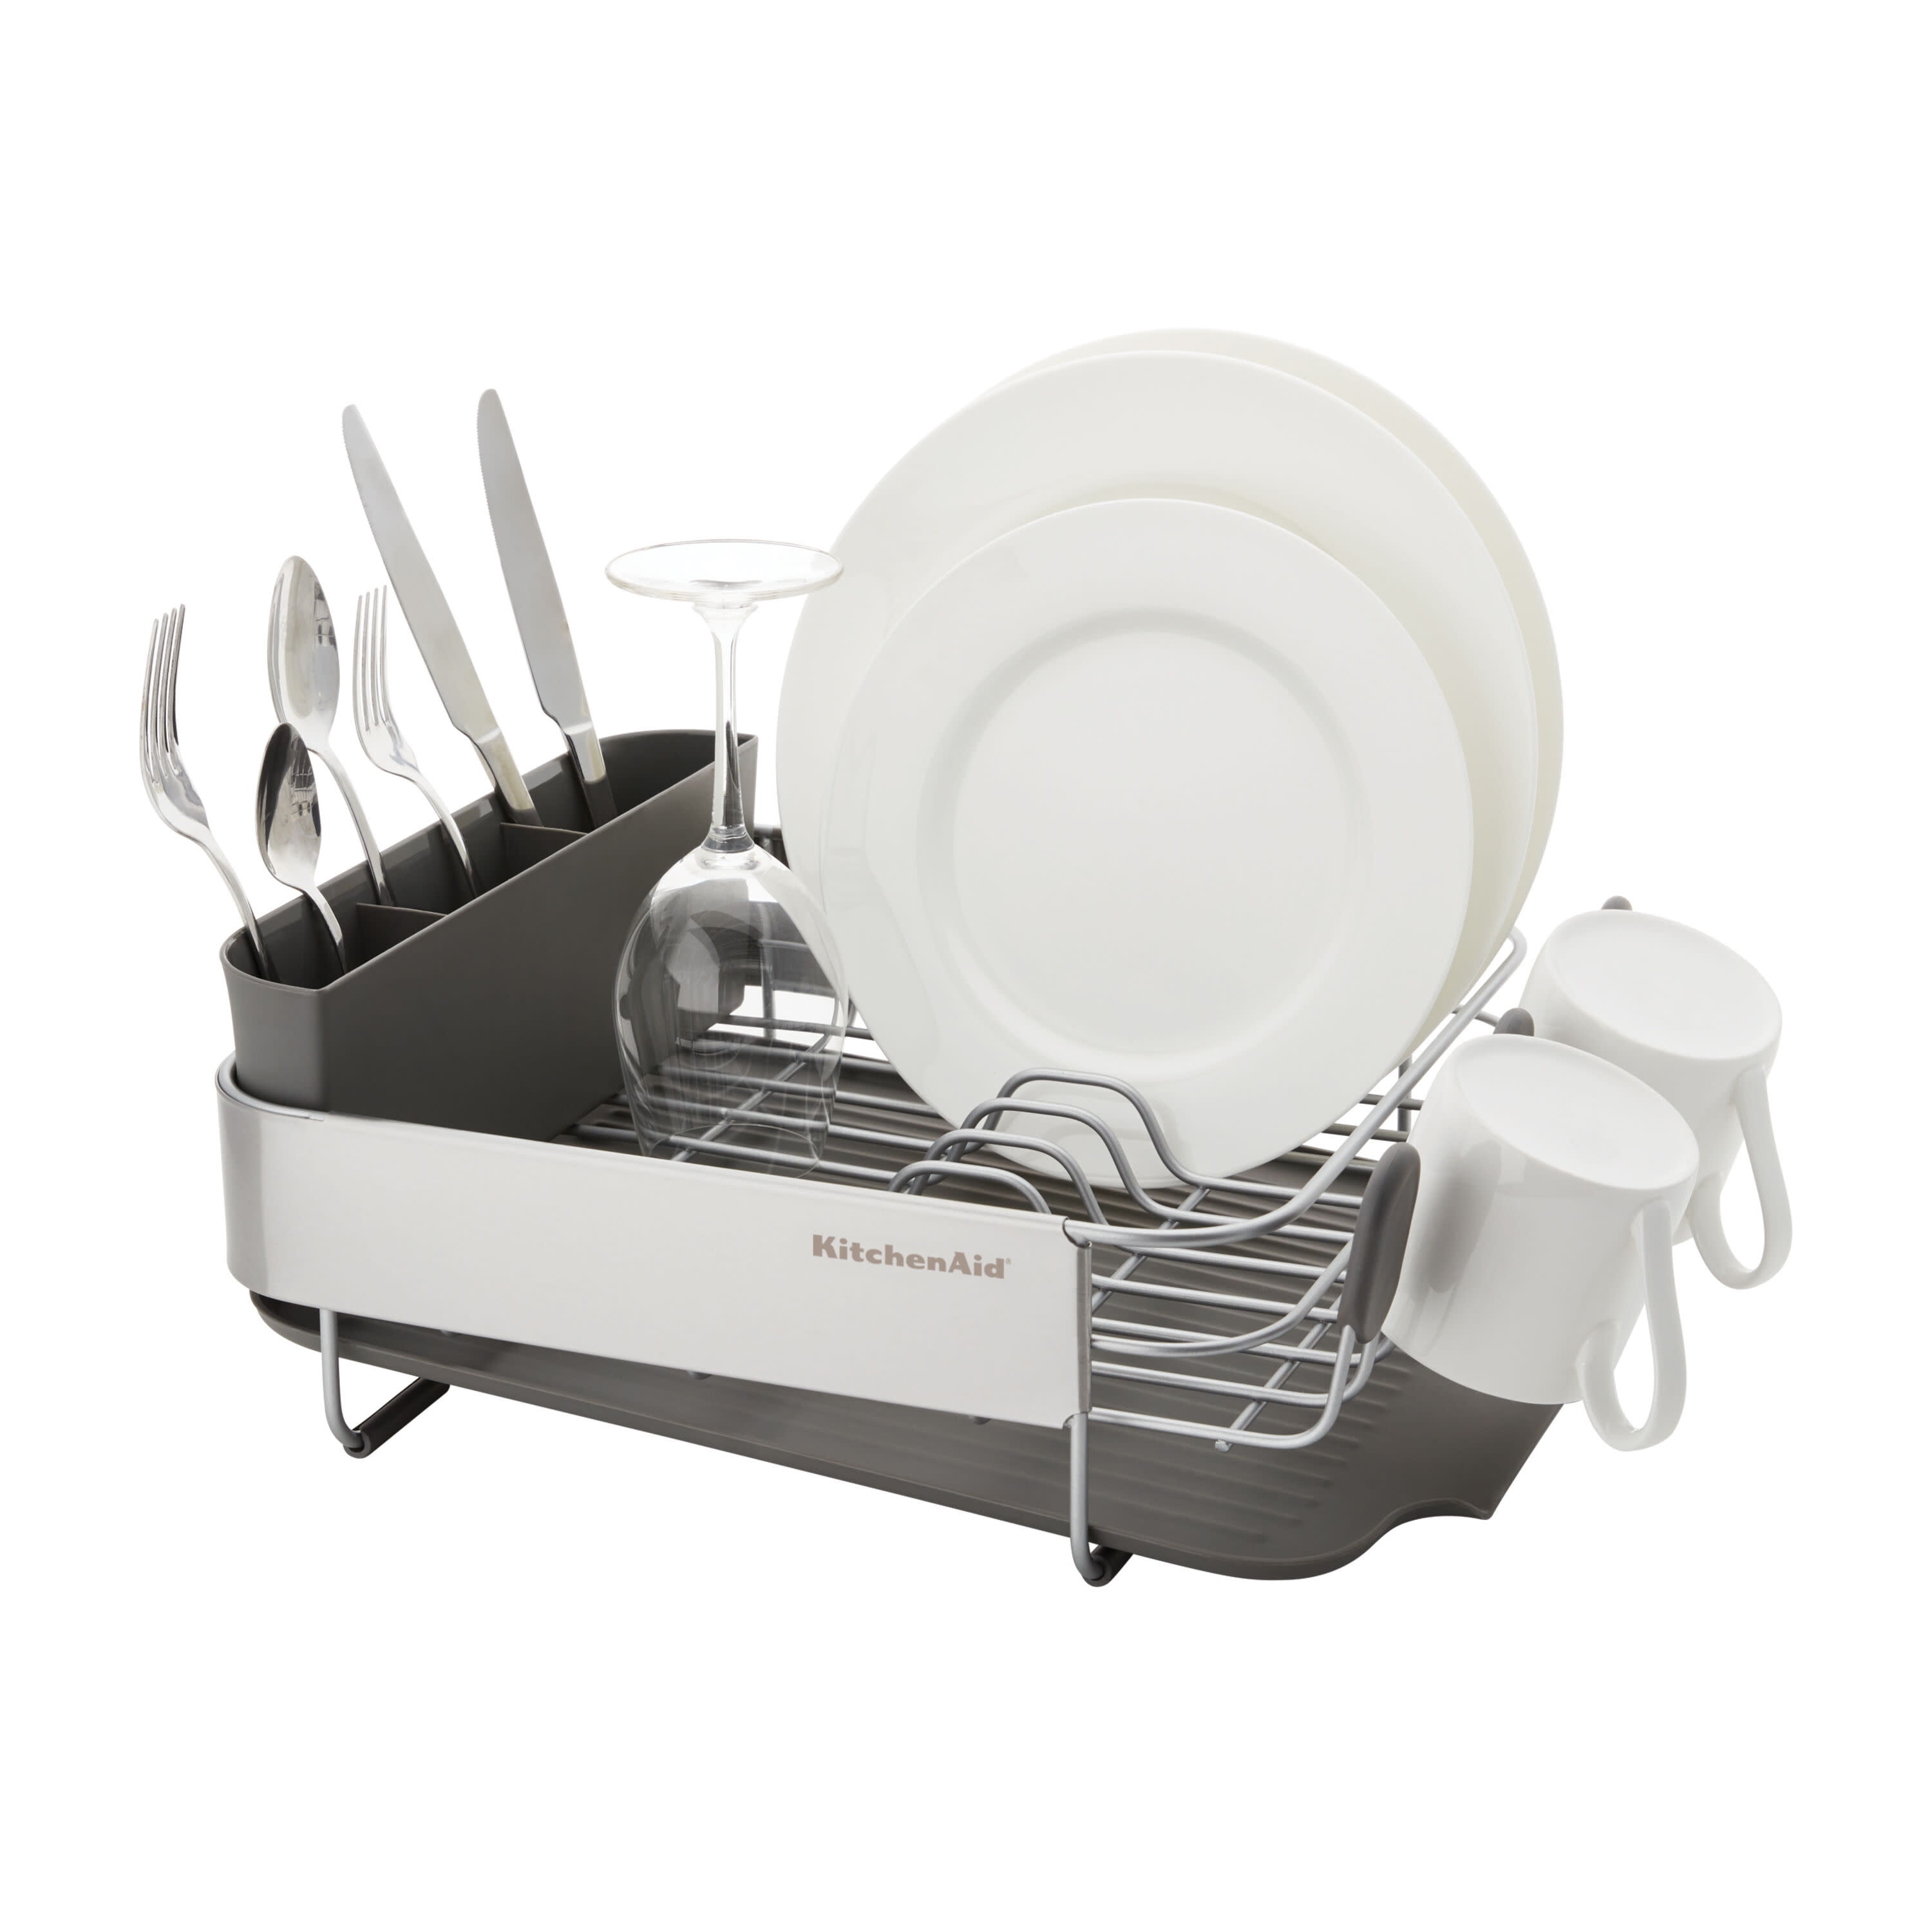  KitchenAid Large Capacity,Full Size, Rust Resistan Dish Rack  with Self Draining Angled Drain Board and Removable Flatware Caddy, Light  Grey, Gray: Home & Kitchen